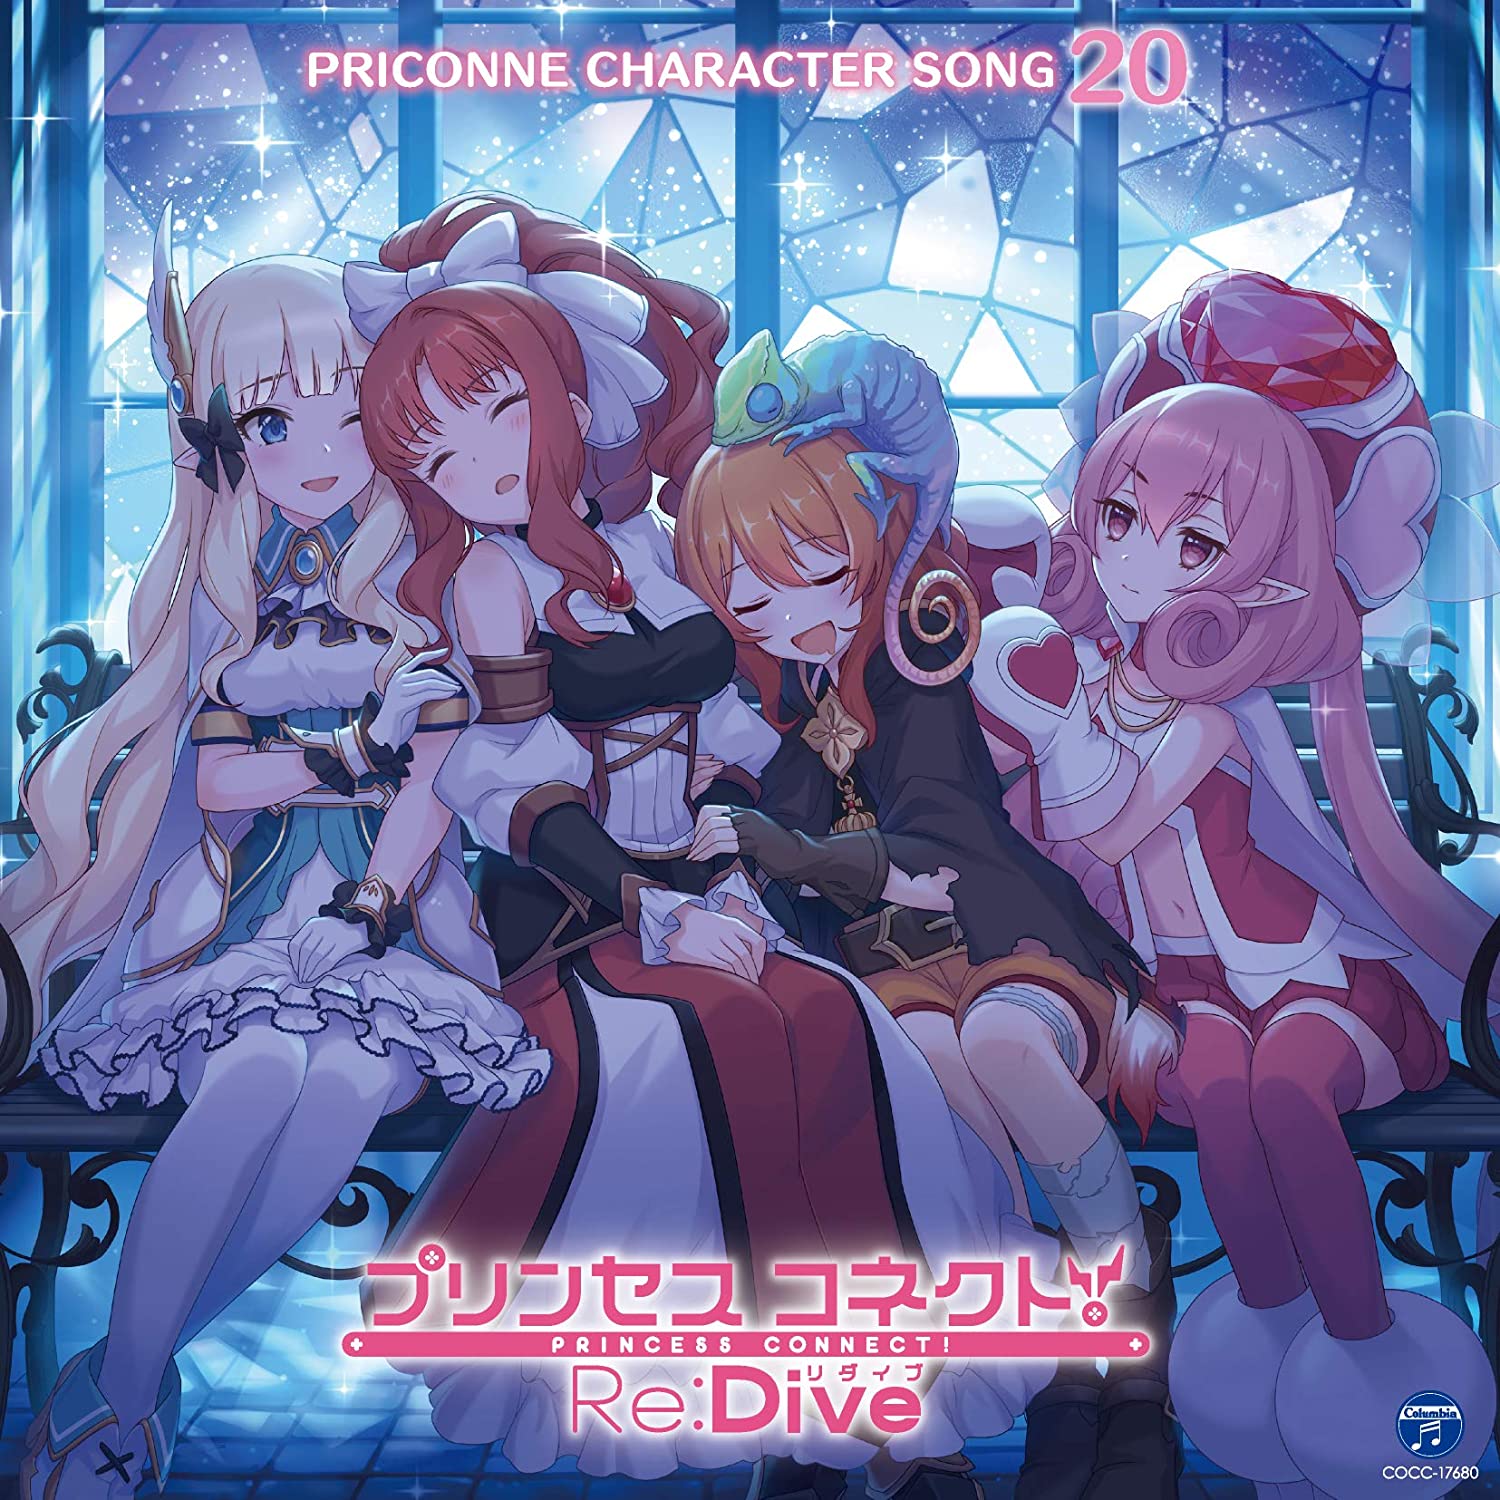 PRICONNE CHARACTER SONG 20.jpg